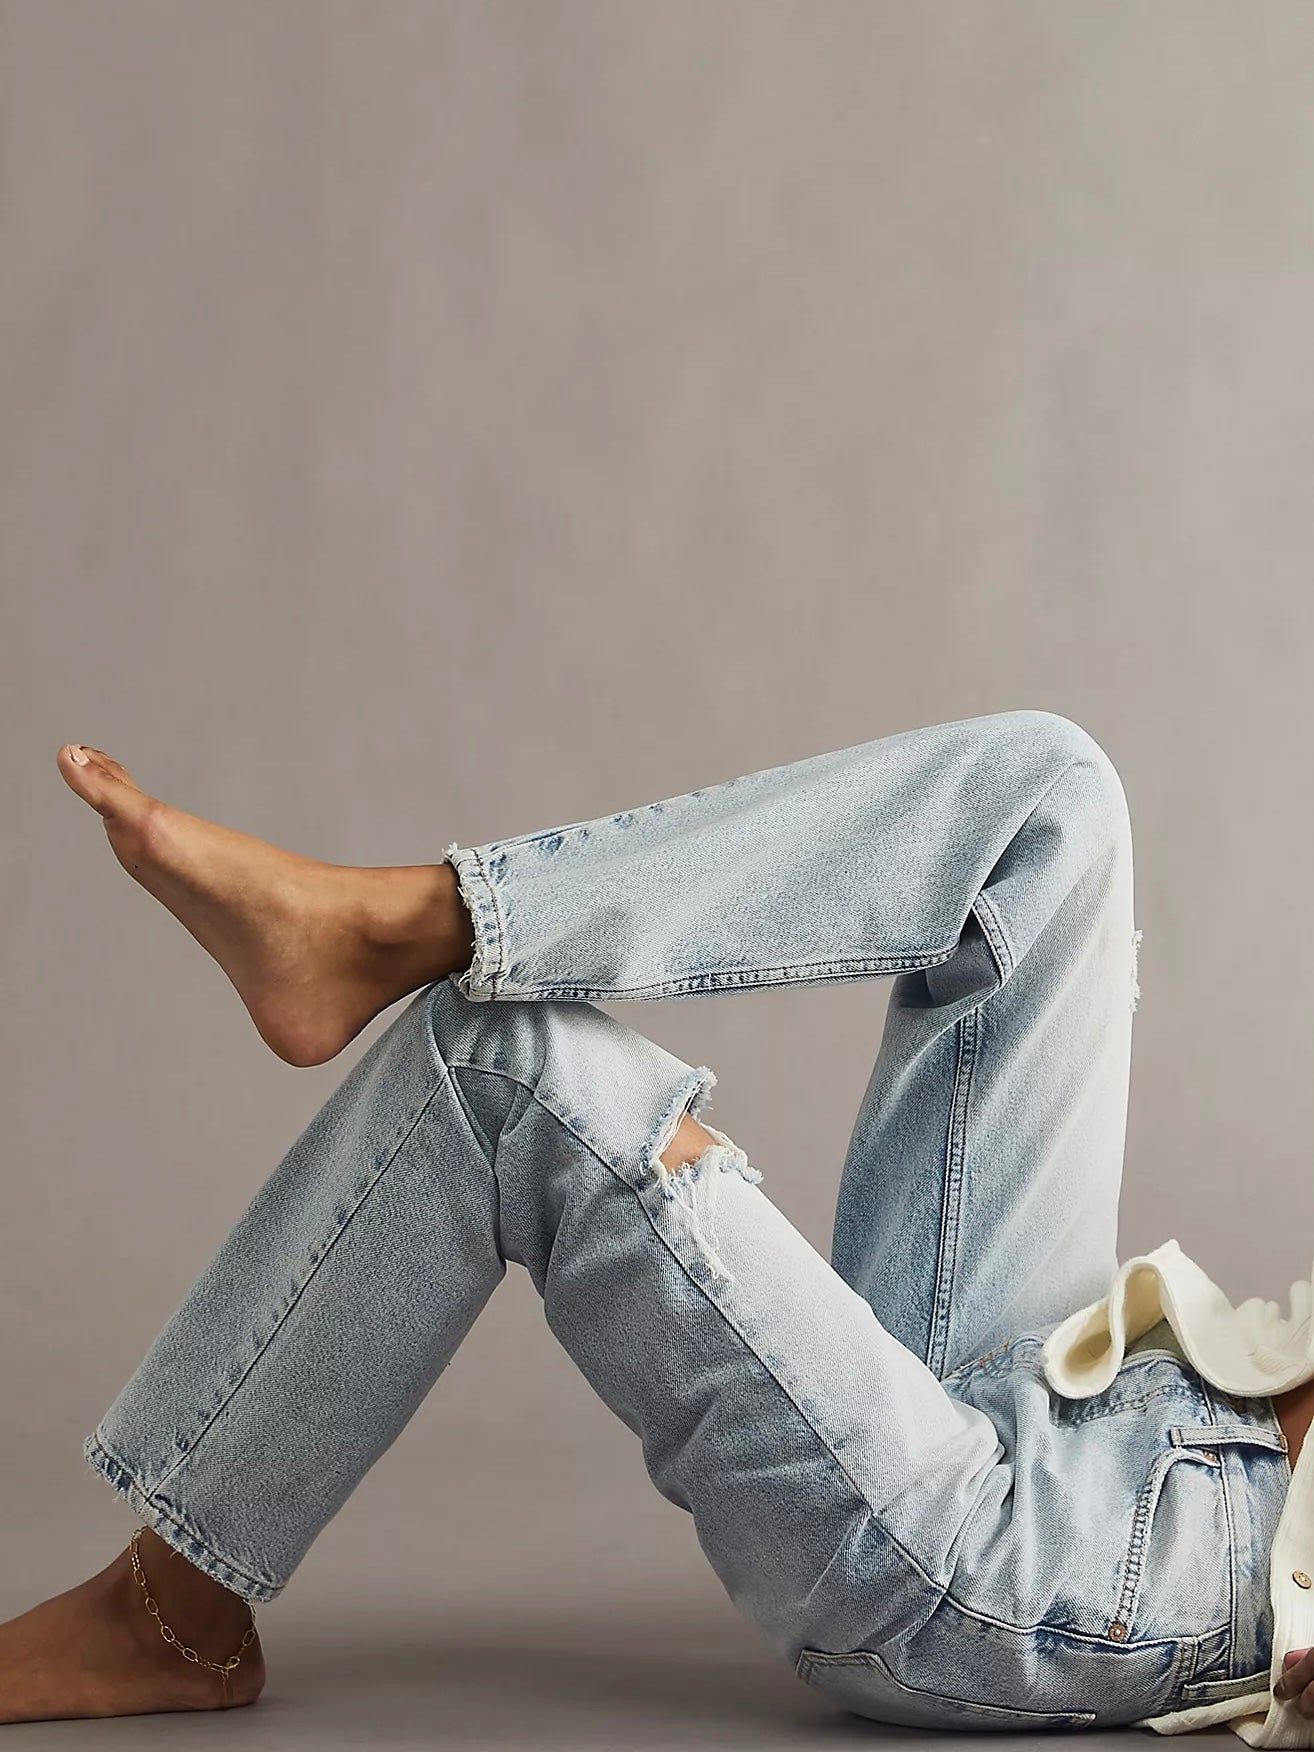 Vintage Jeans: Embracing Retro Style with Denim